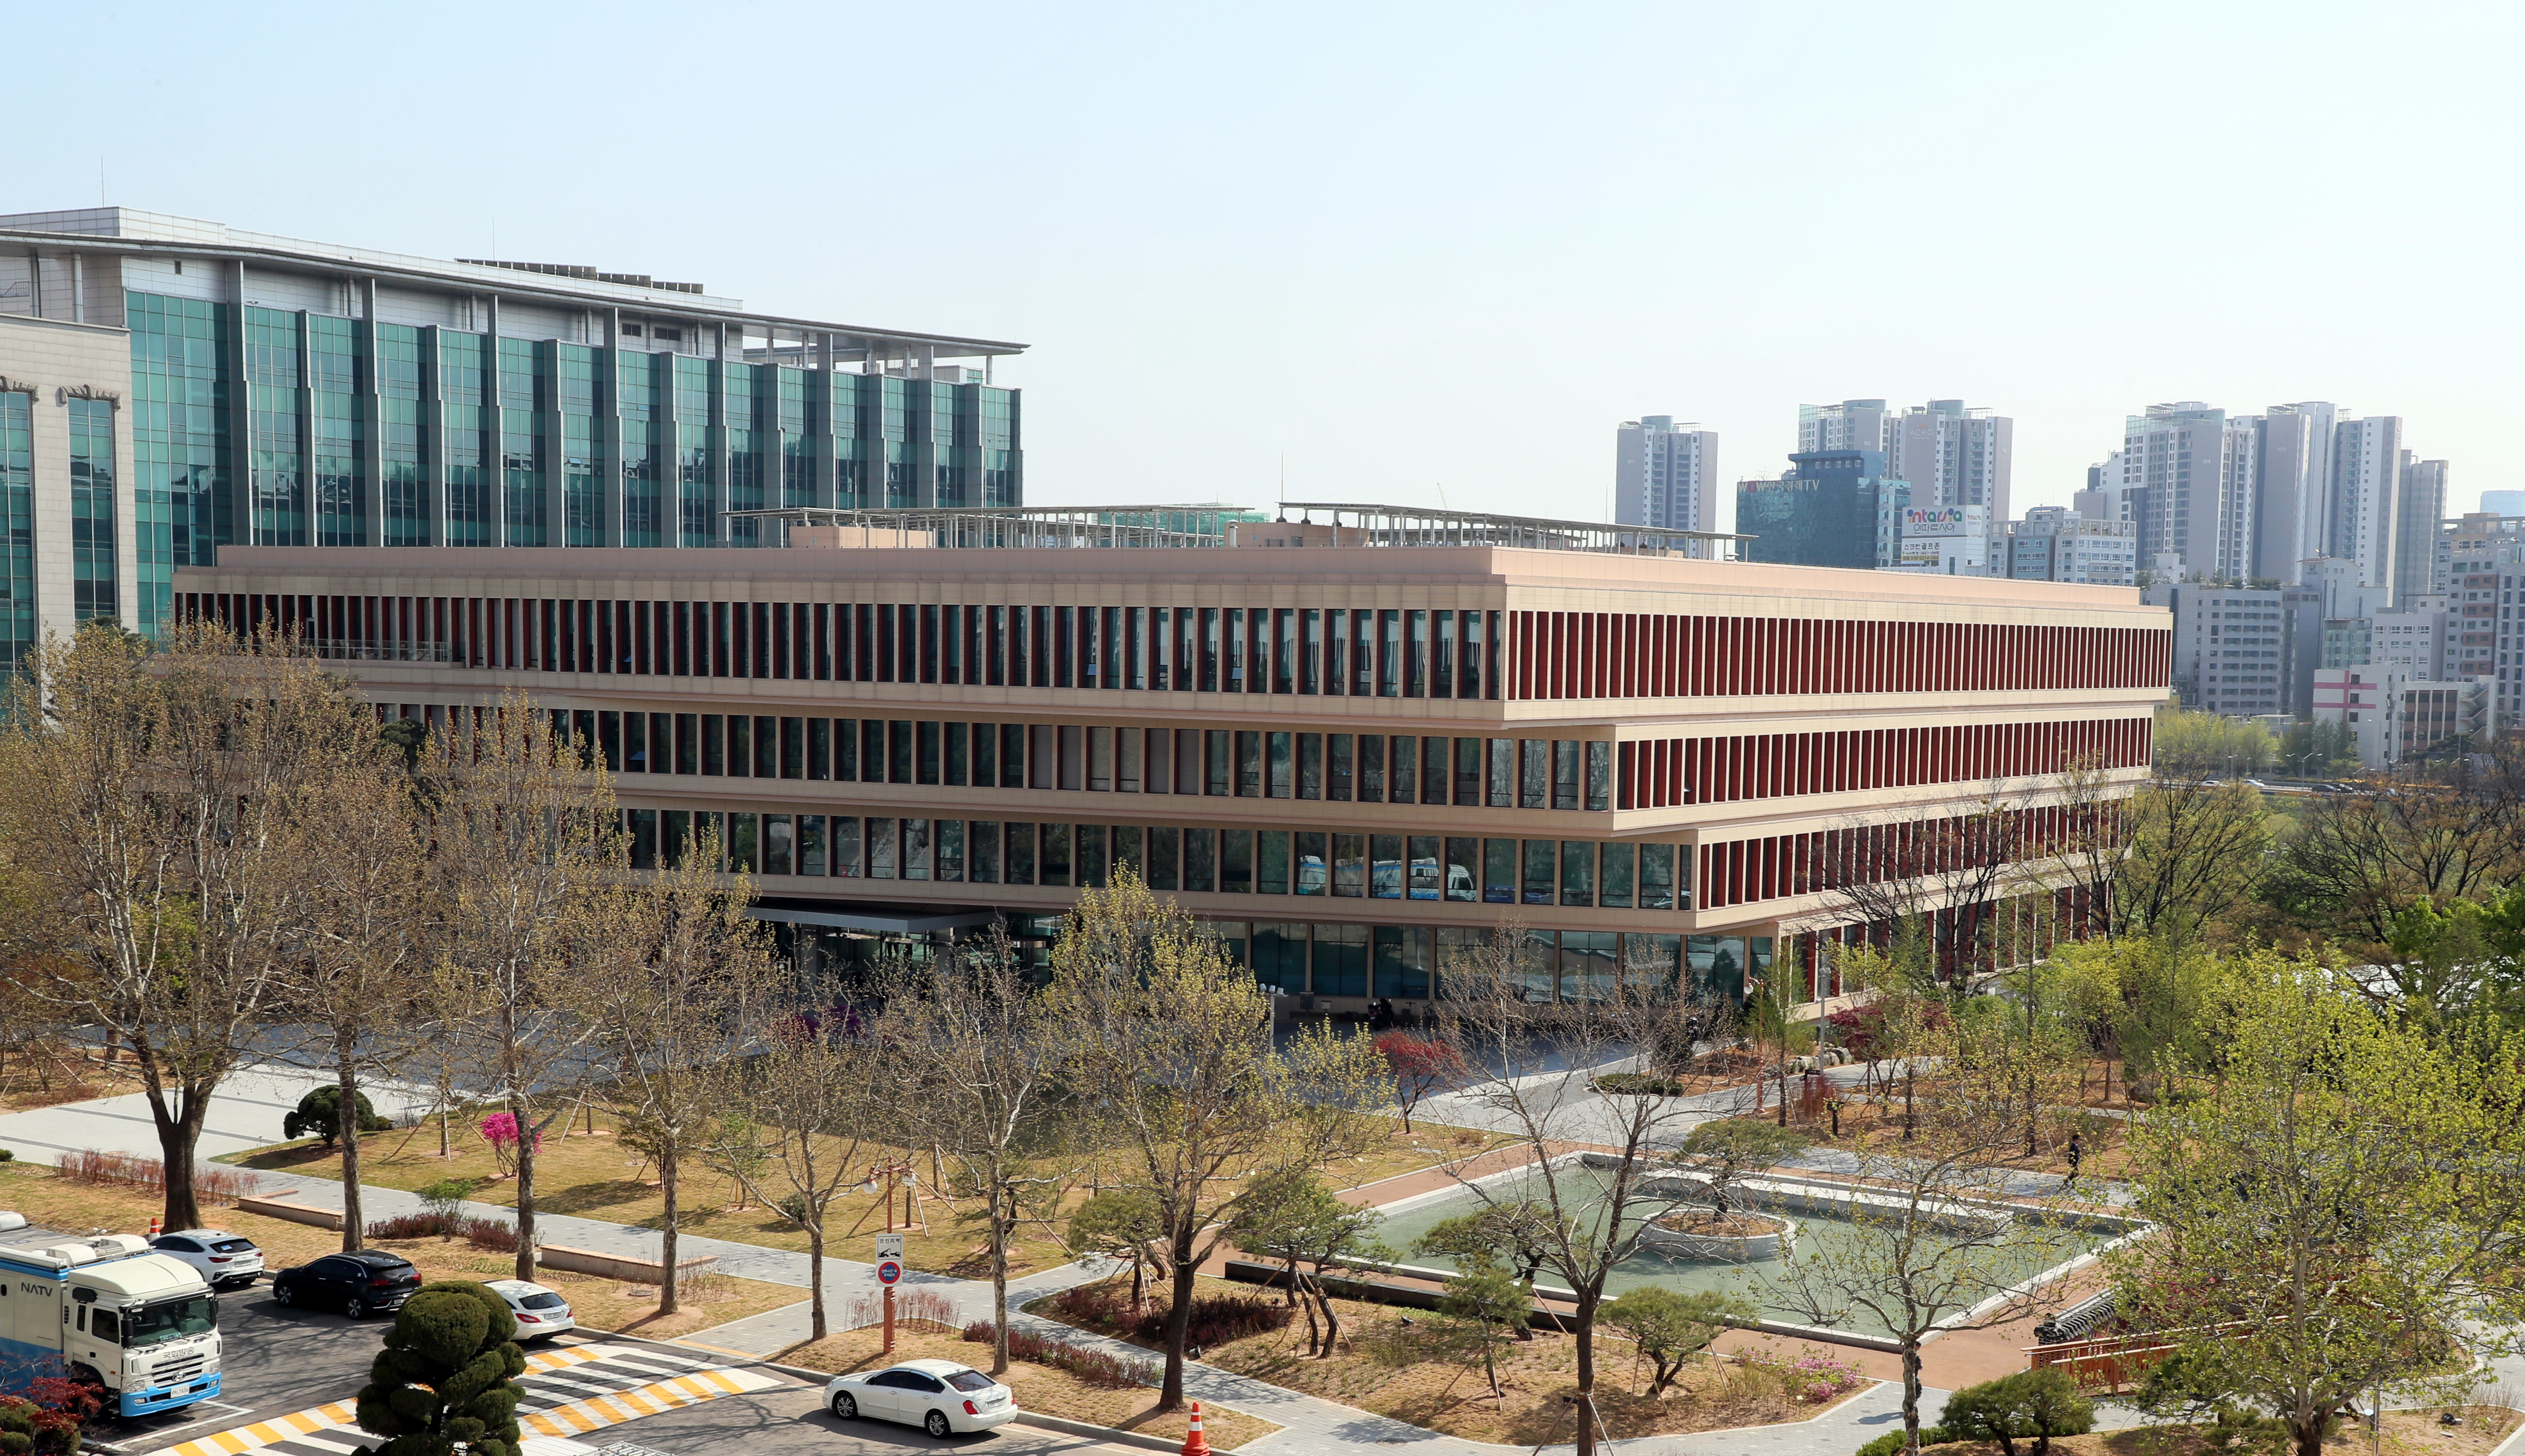 View of the The Communication Building 관련사진 4 보기